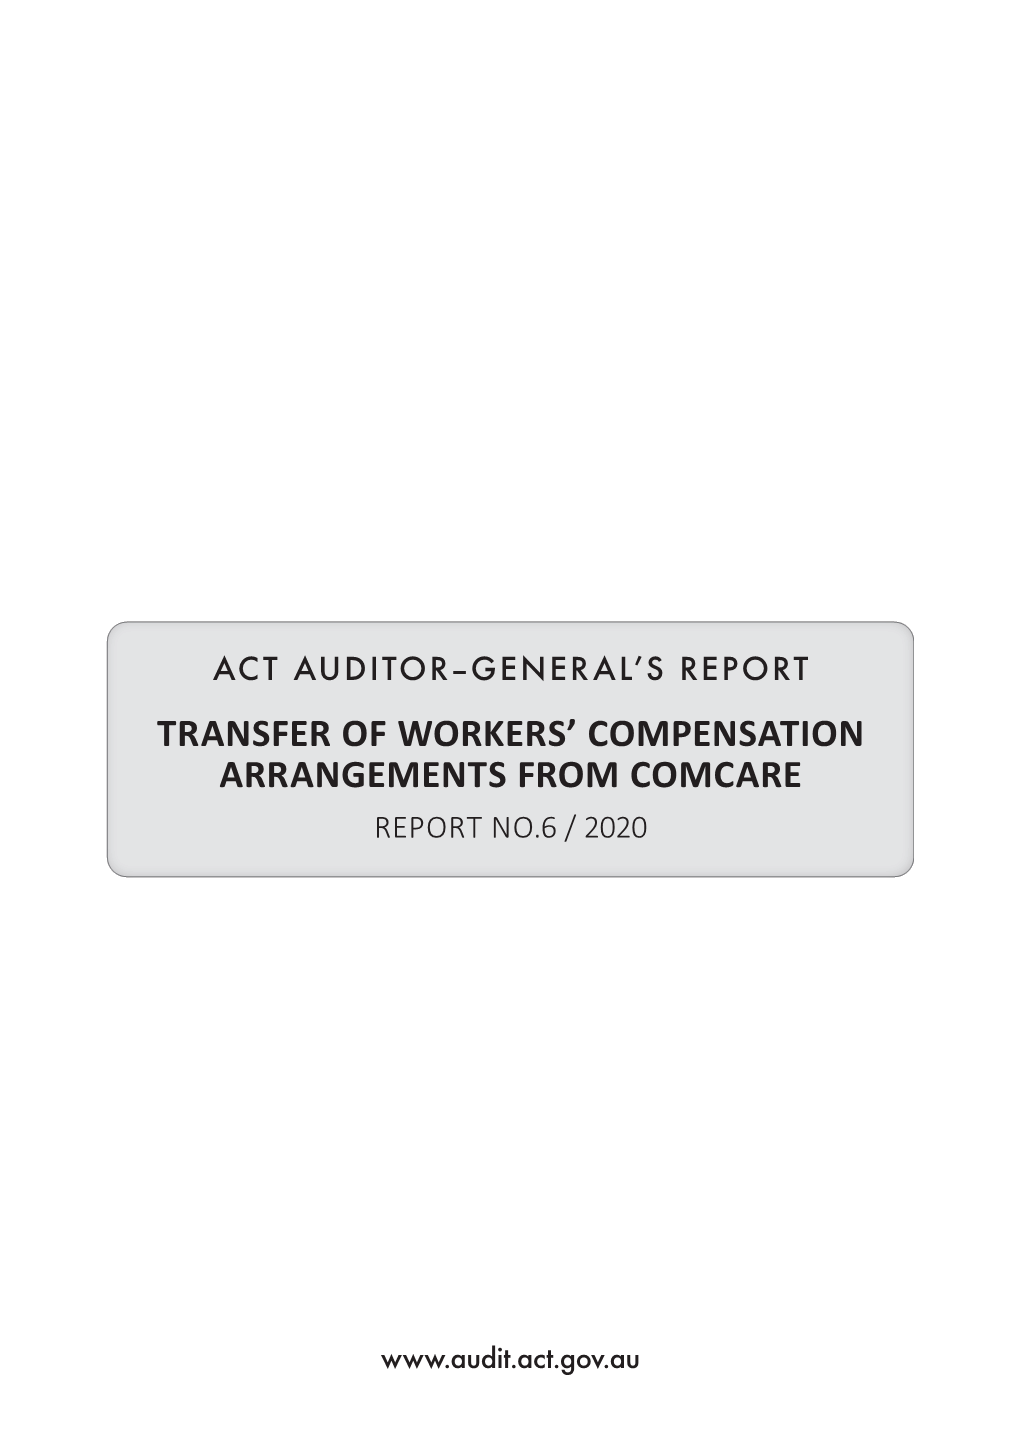 Transfer of Workers' Compensation Arrangements from Comcare